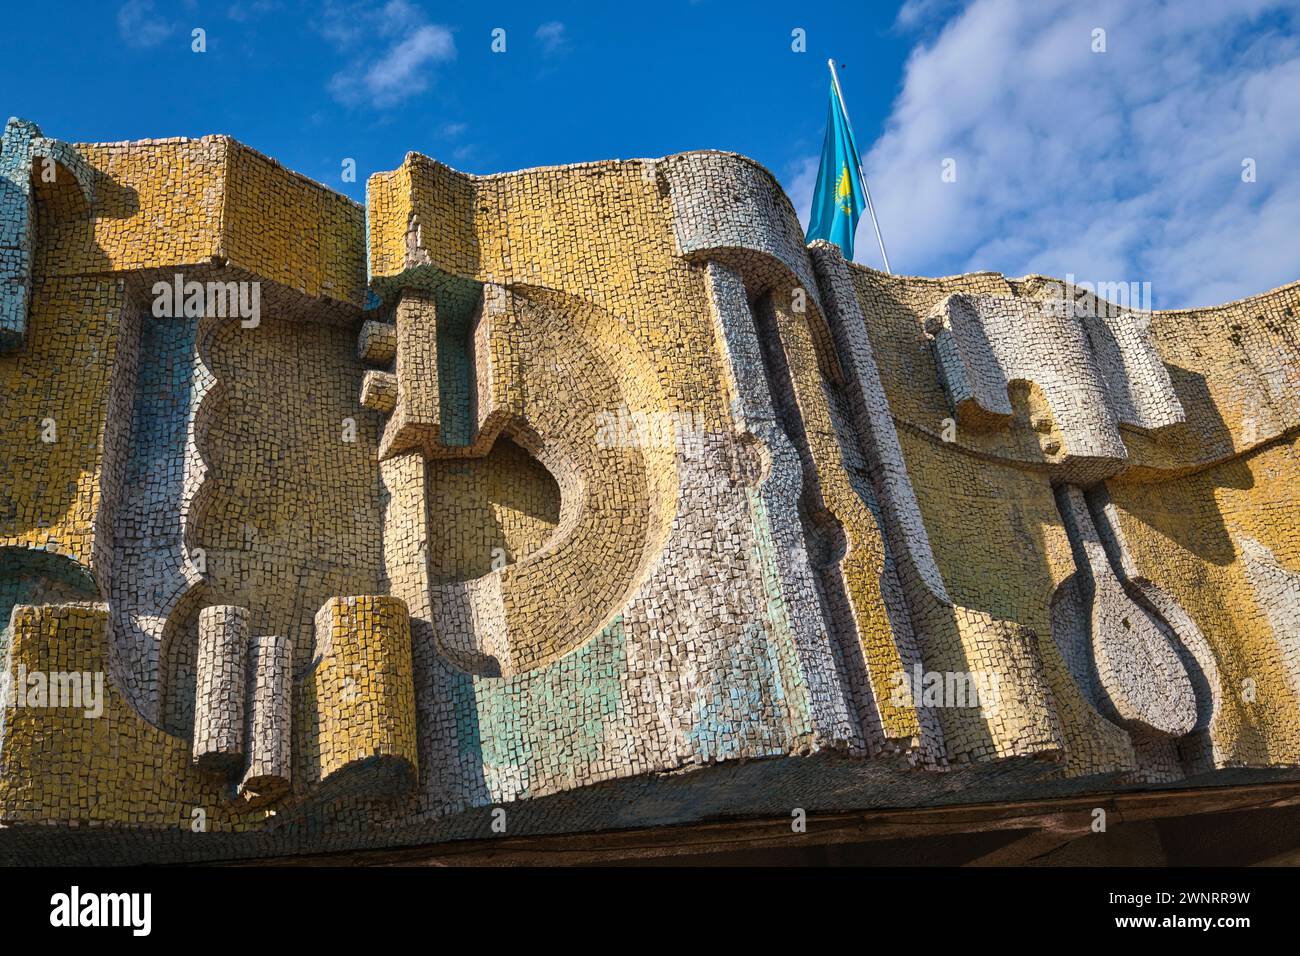 Detail of the concrete tiled curves on the facade of the iconic Soviet, socialist, modernist, mosaic style of the N. Sats Russian Theater for Children Stock Photo